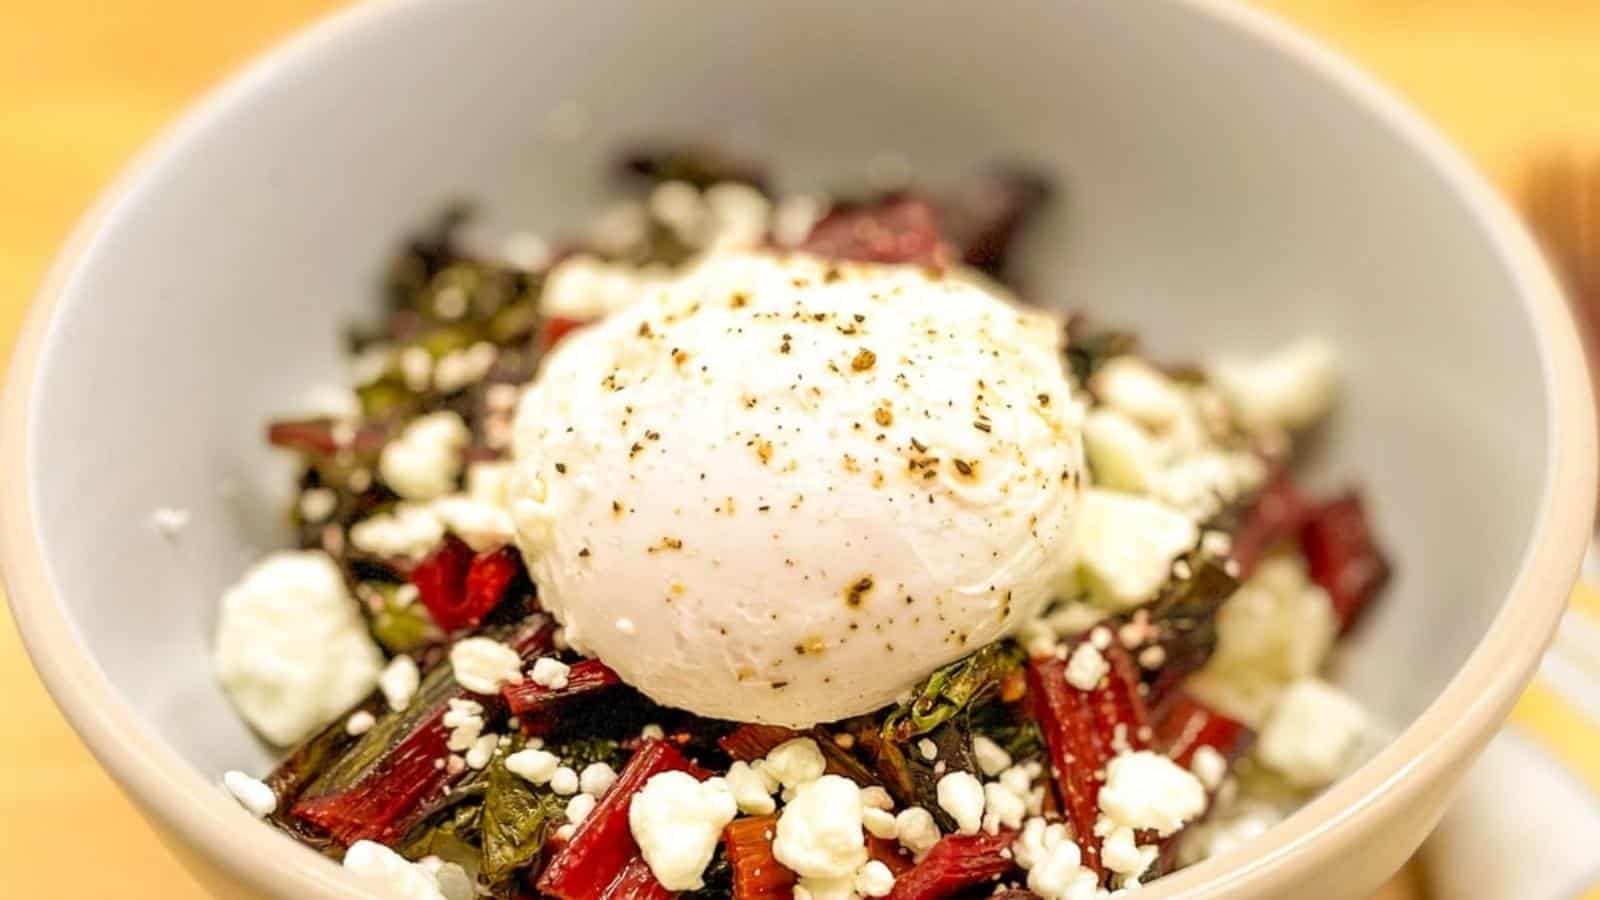 Grain bowl topped with sauteed swiss chard, goat cheese, and a poached egg.